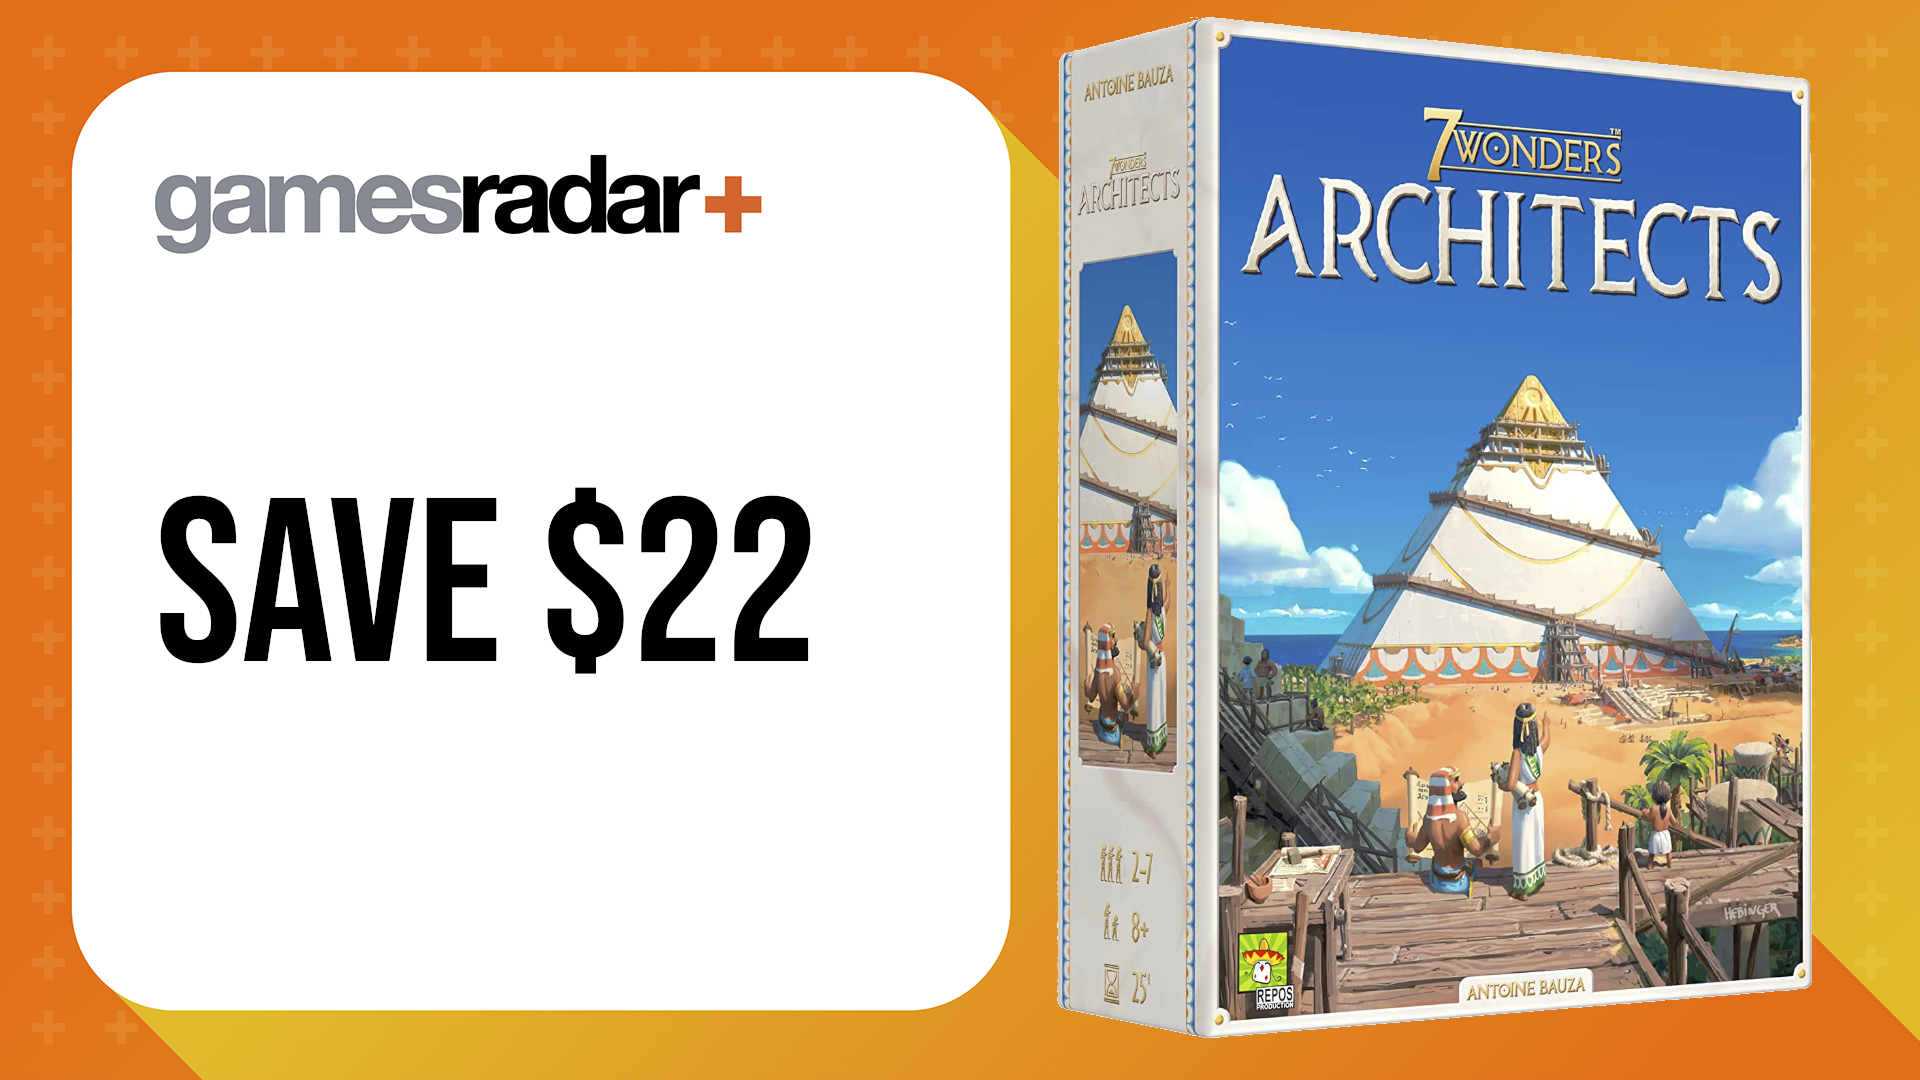 Cyber Monday board game deals with 7 Wonders Architects